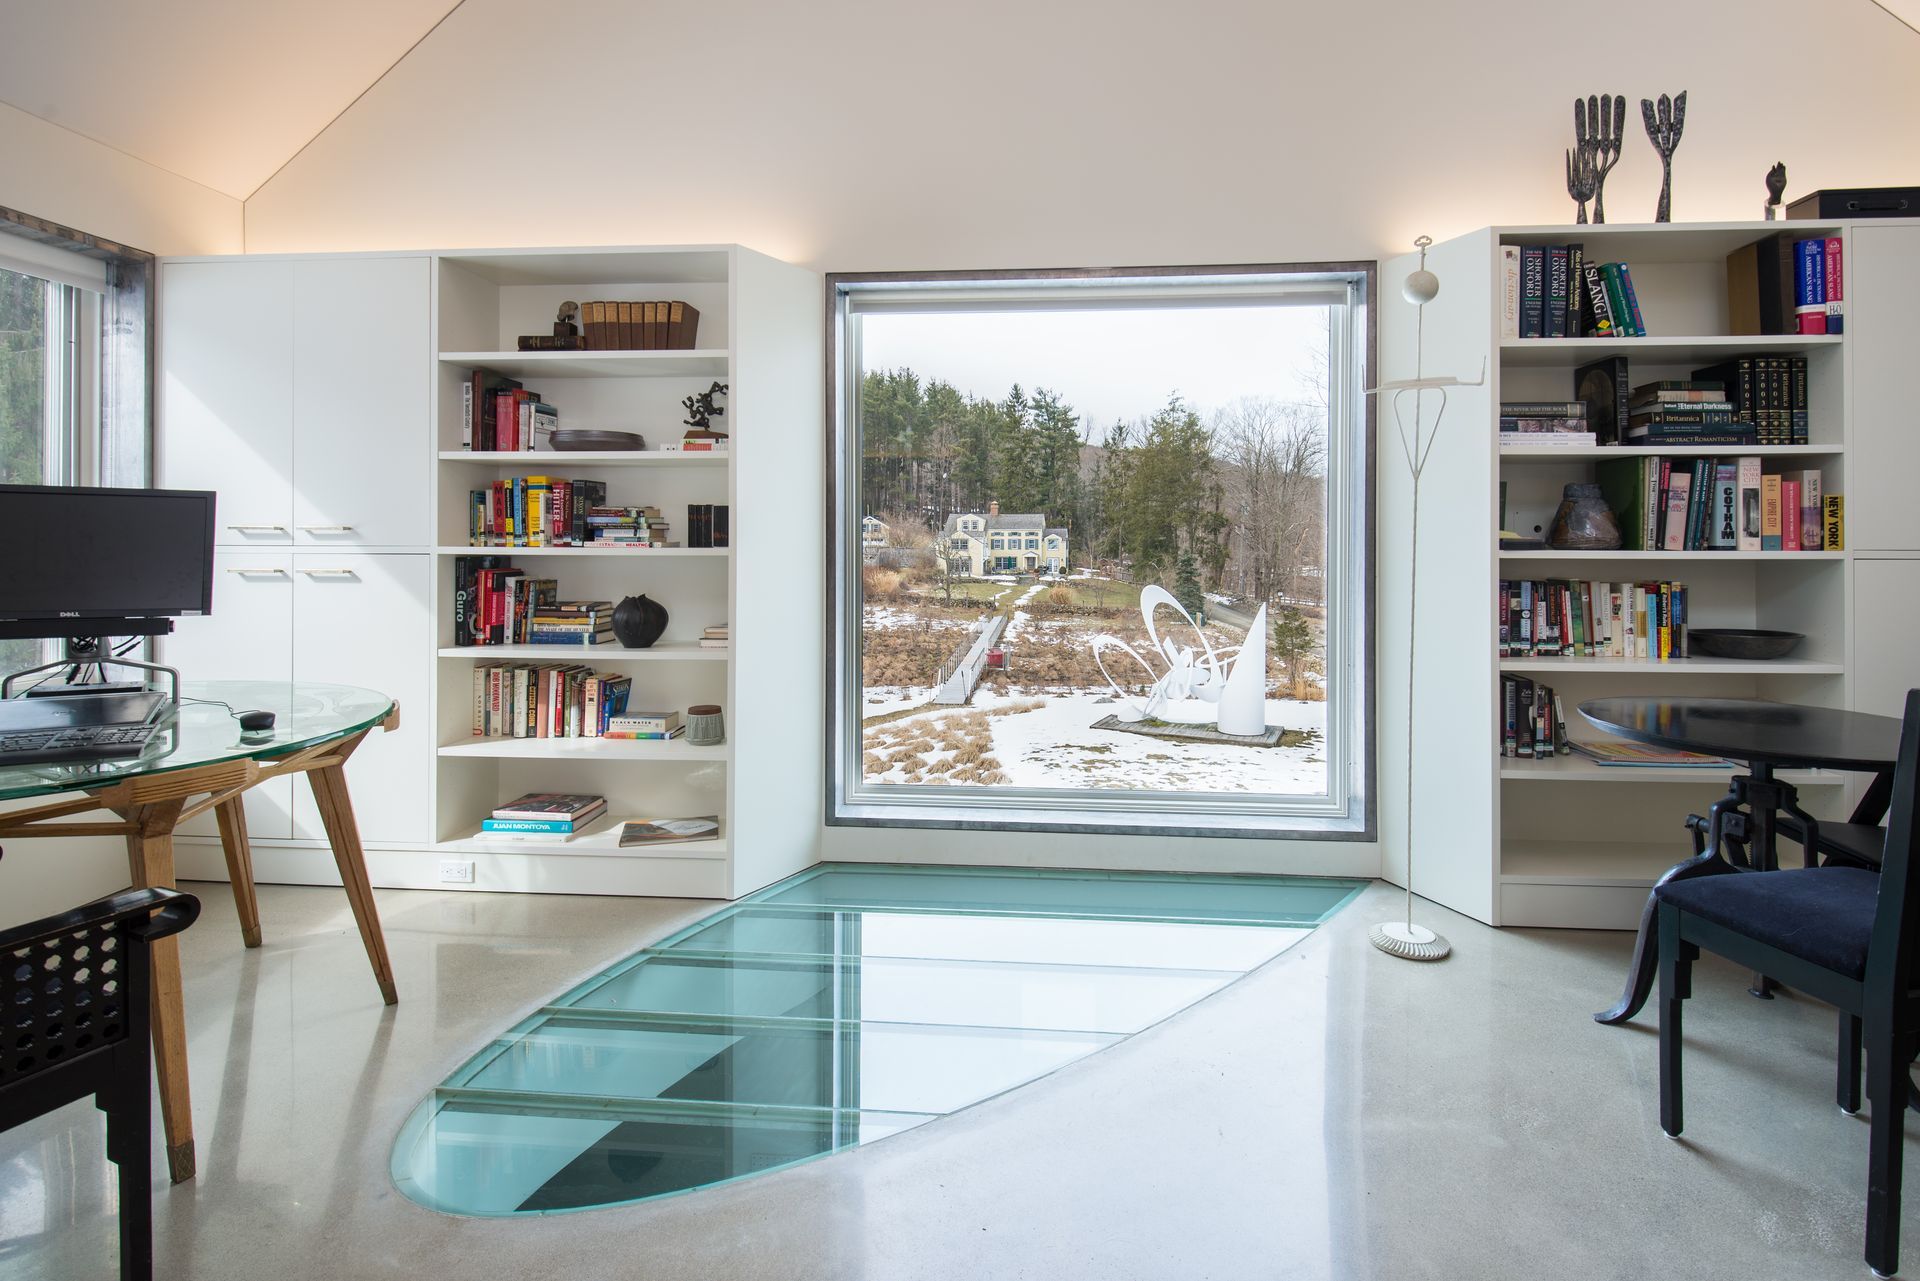 Walkable glass flooring in the interior of a private residence